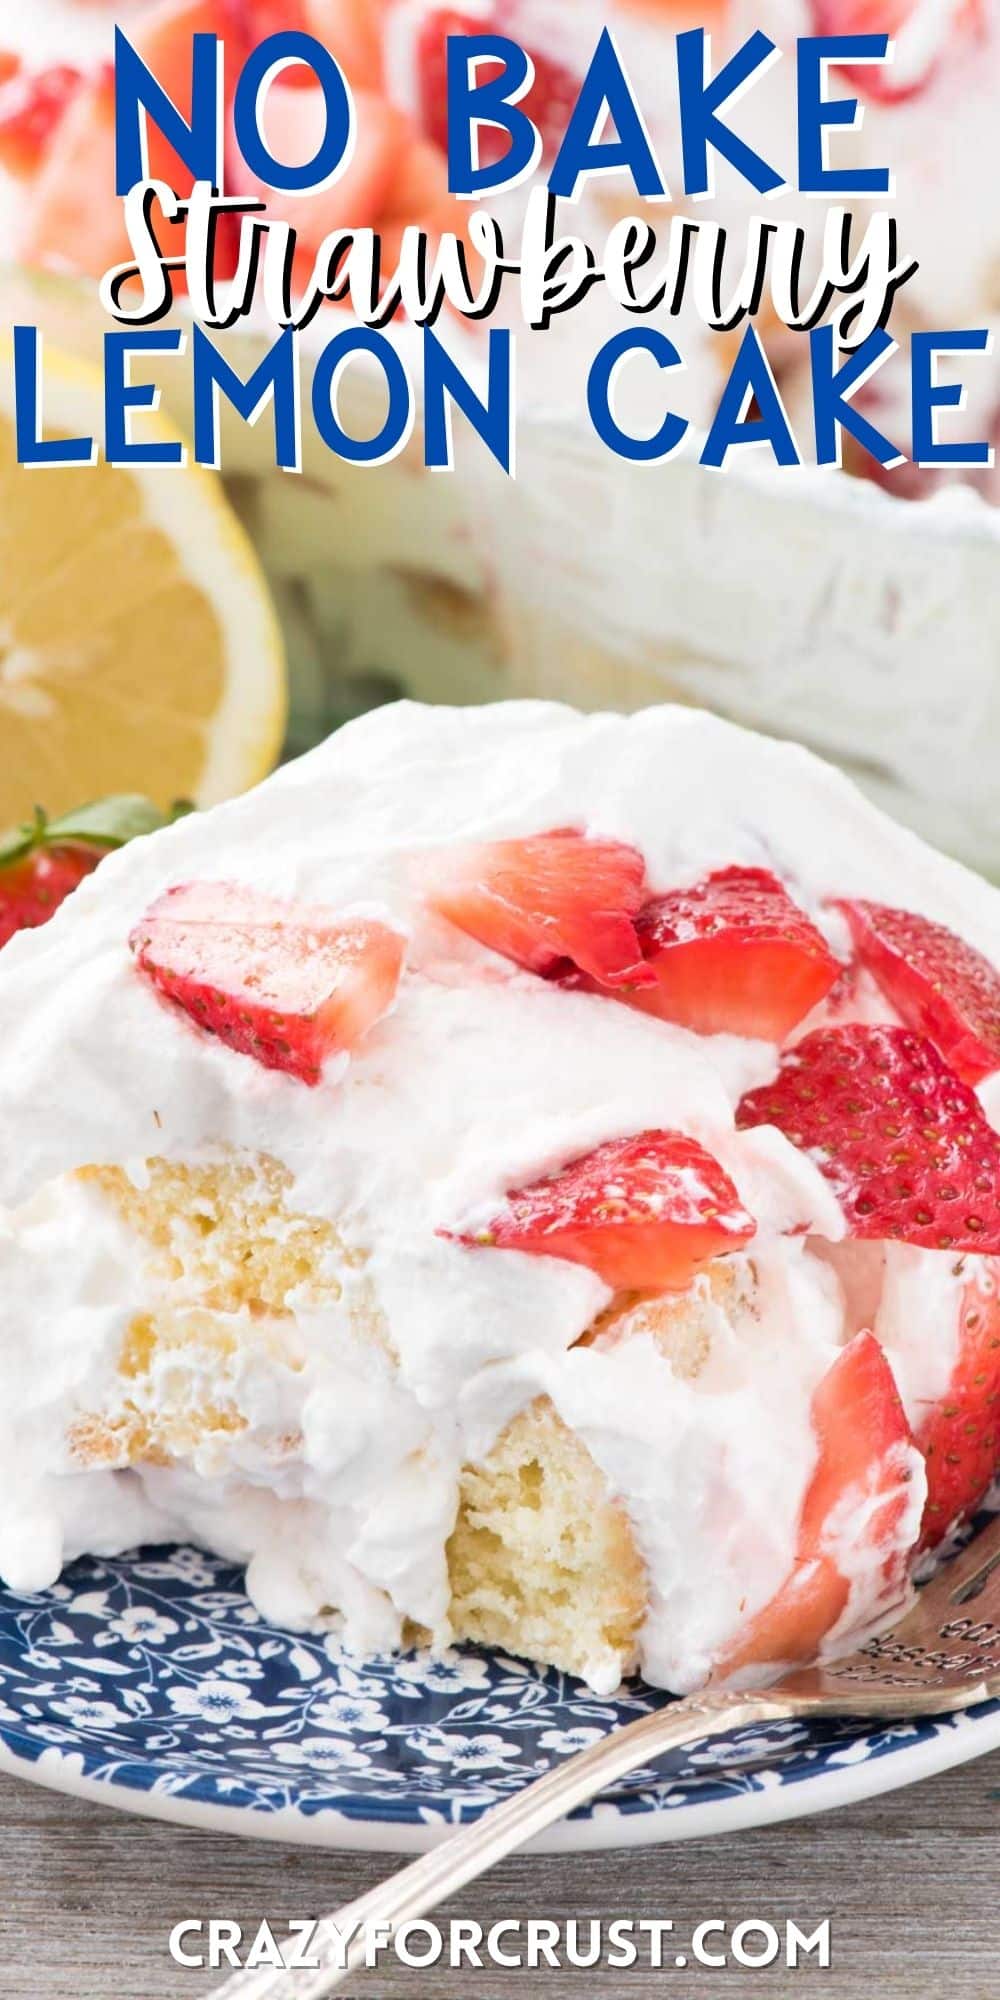 strawberry cake topped with whipped cream and strawberries on top with words on the image.